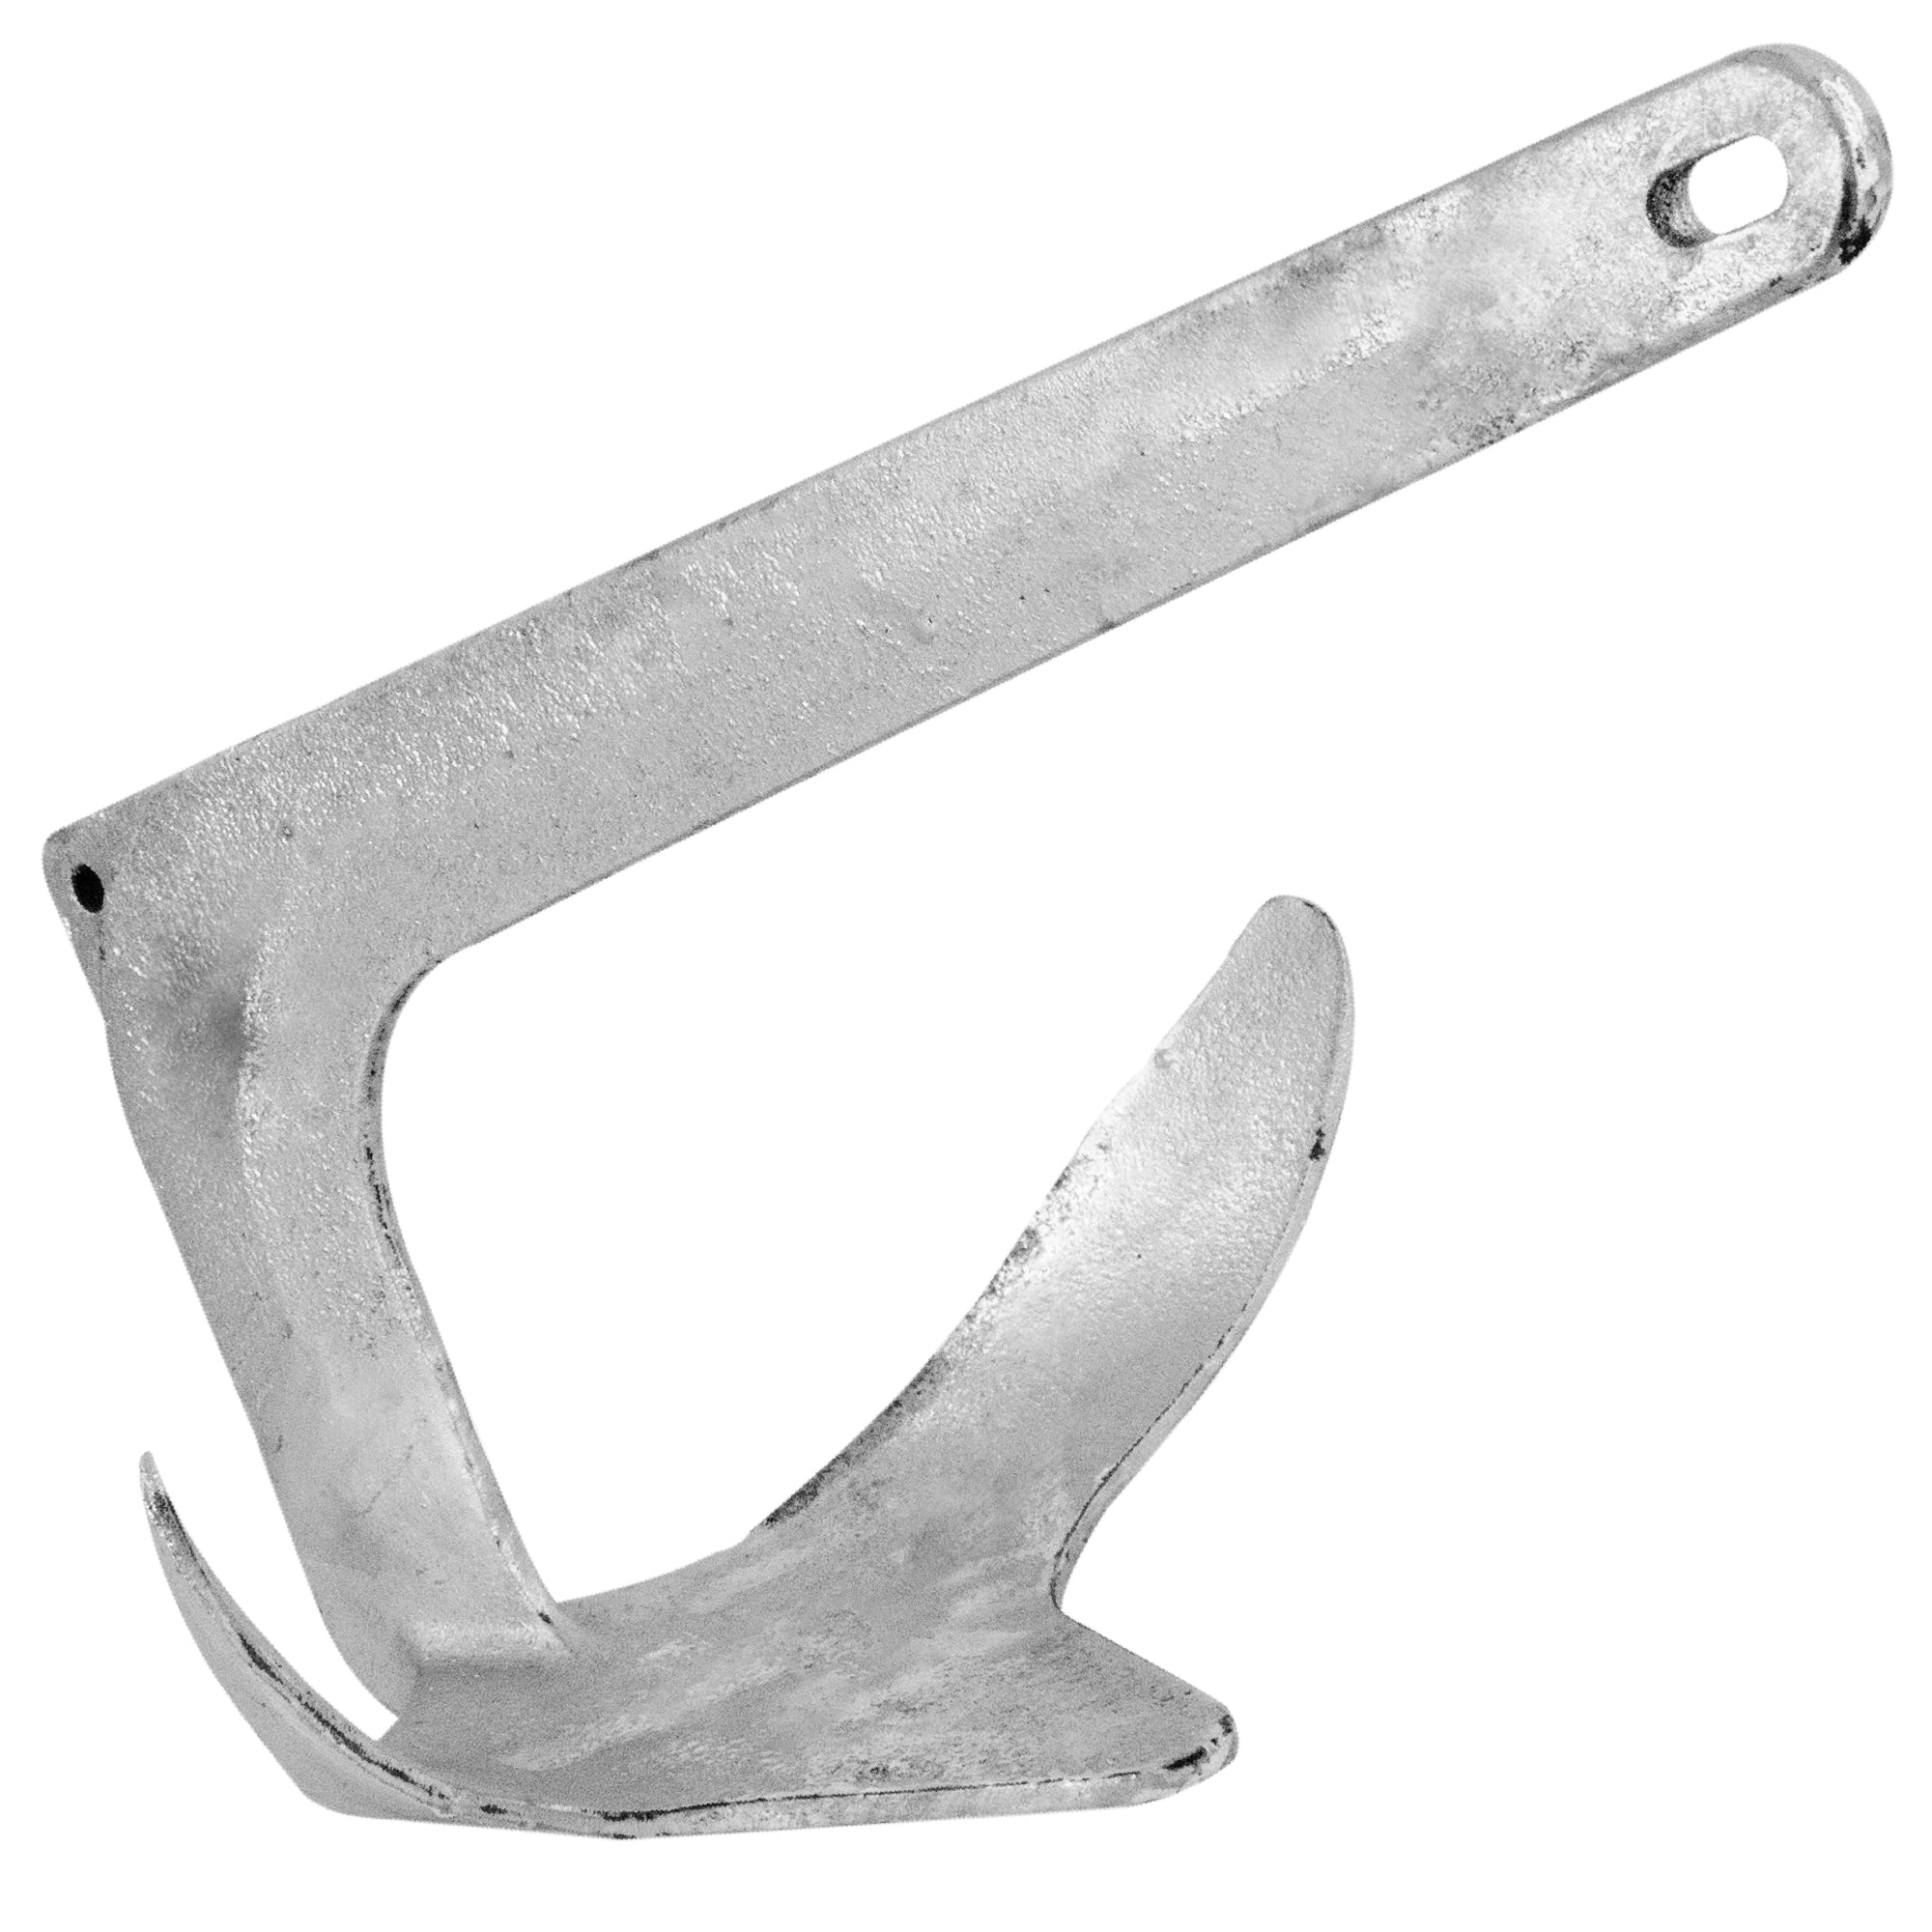 Bruce Style Claw Anchor, 11 Lb / 5 Kg Hot Dipped Galvanized - FO4550